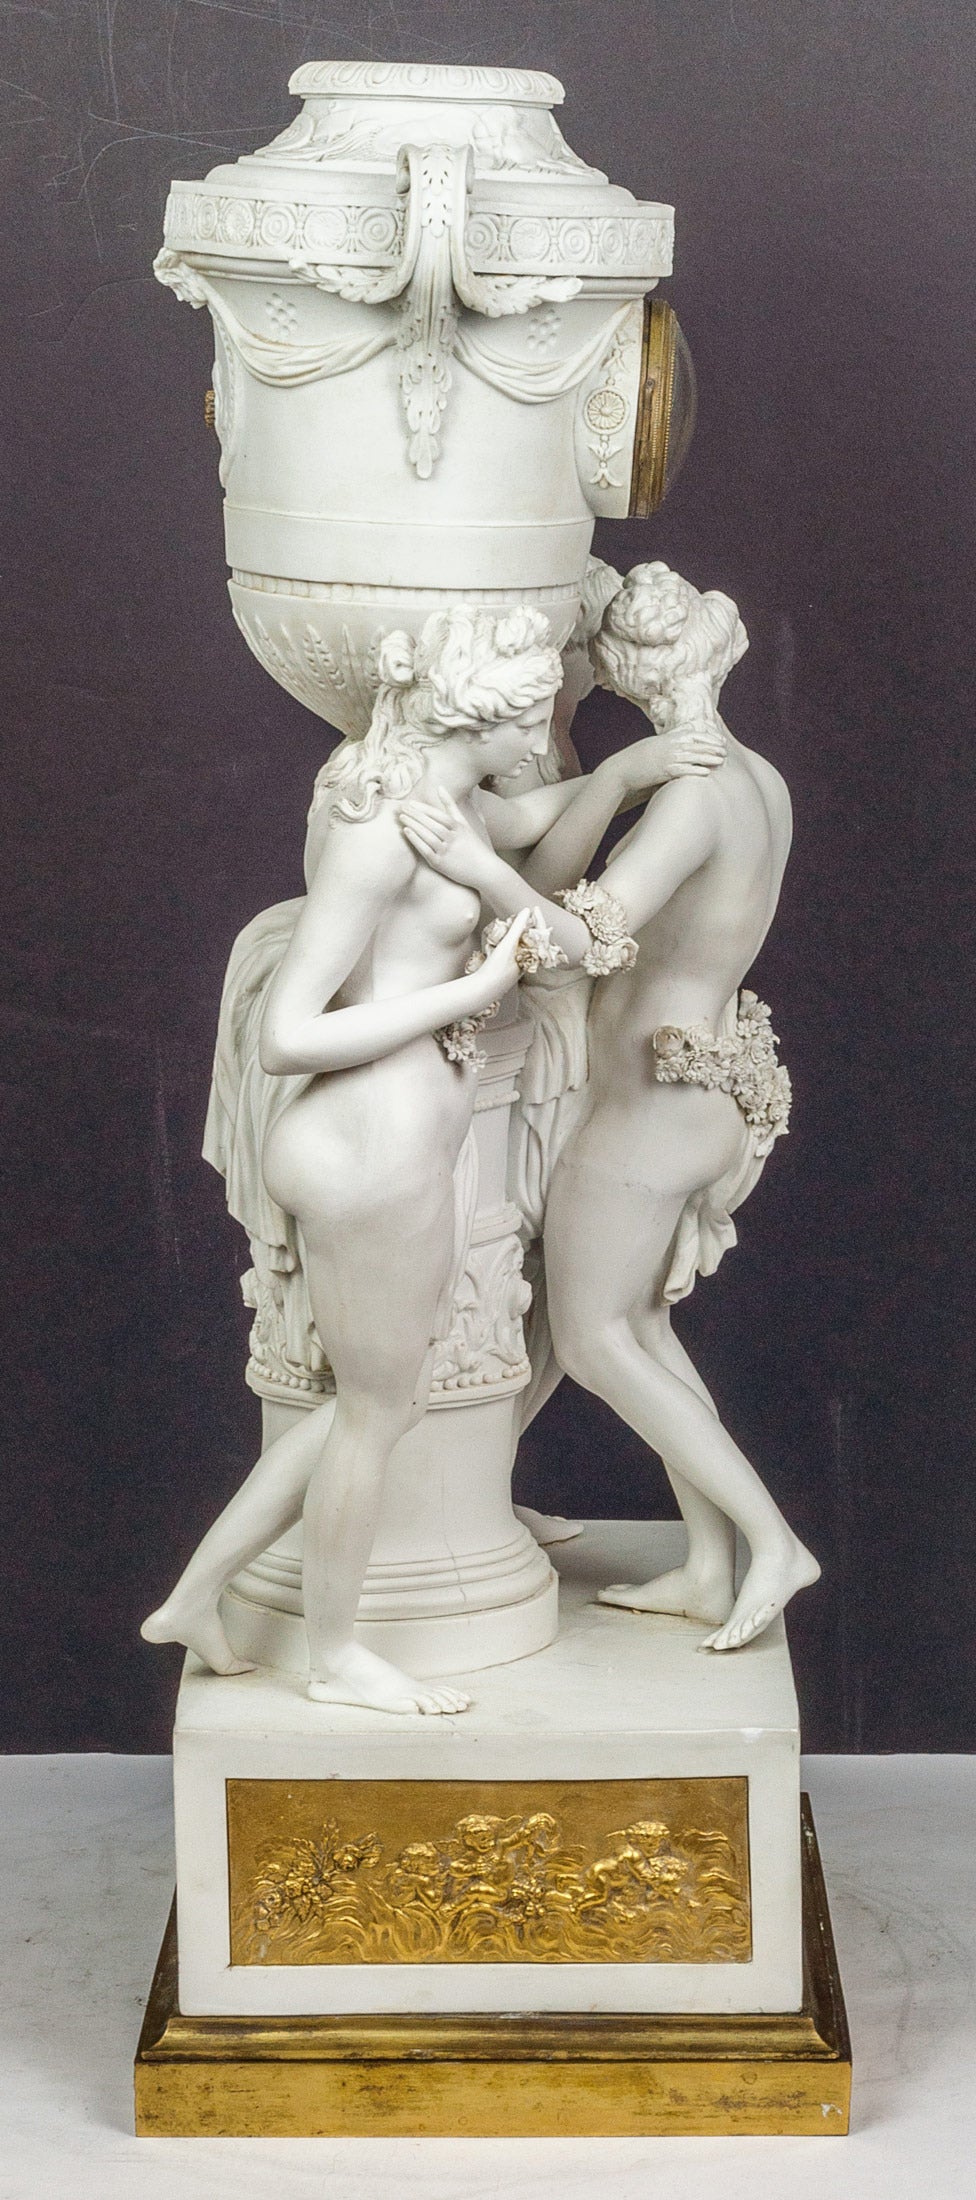 A Neoclassical French Bisque Porcelain Figural Mantel Clock with Standing Nude Figures on Bronze Base.
Stock Number: CC22